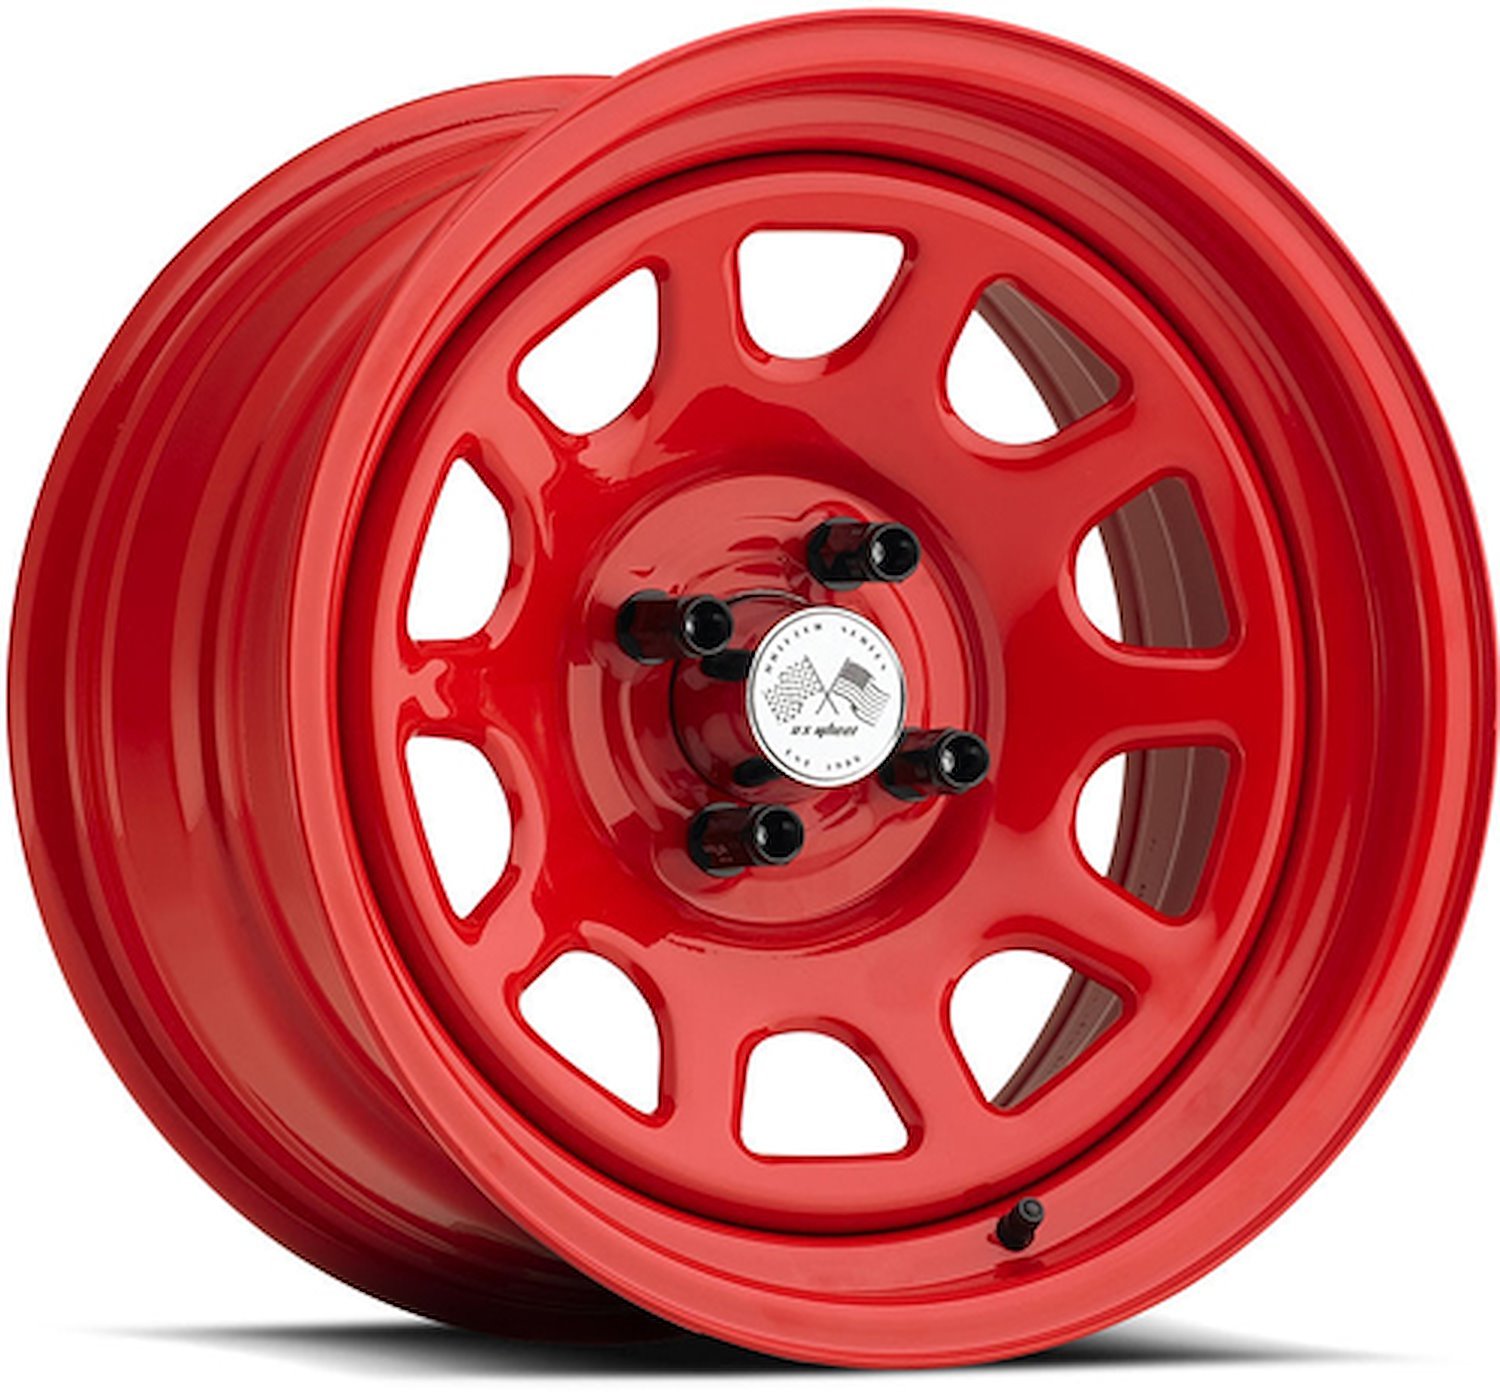 PAINTED DAYTONA FWD DRIFTER RED 15 x 8 4 x 100 Bolt Circle 45 Back Spacing 0 offset 266 Center Bore 1400 lbs Load Rating